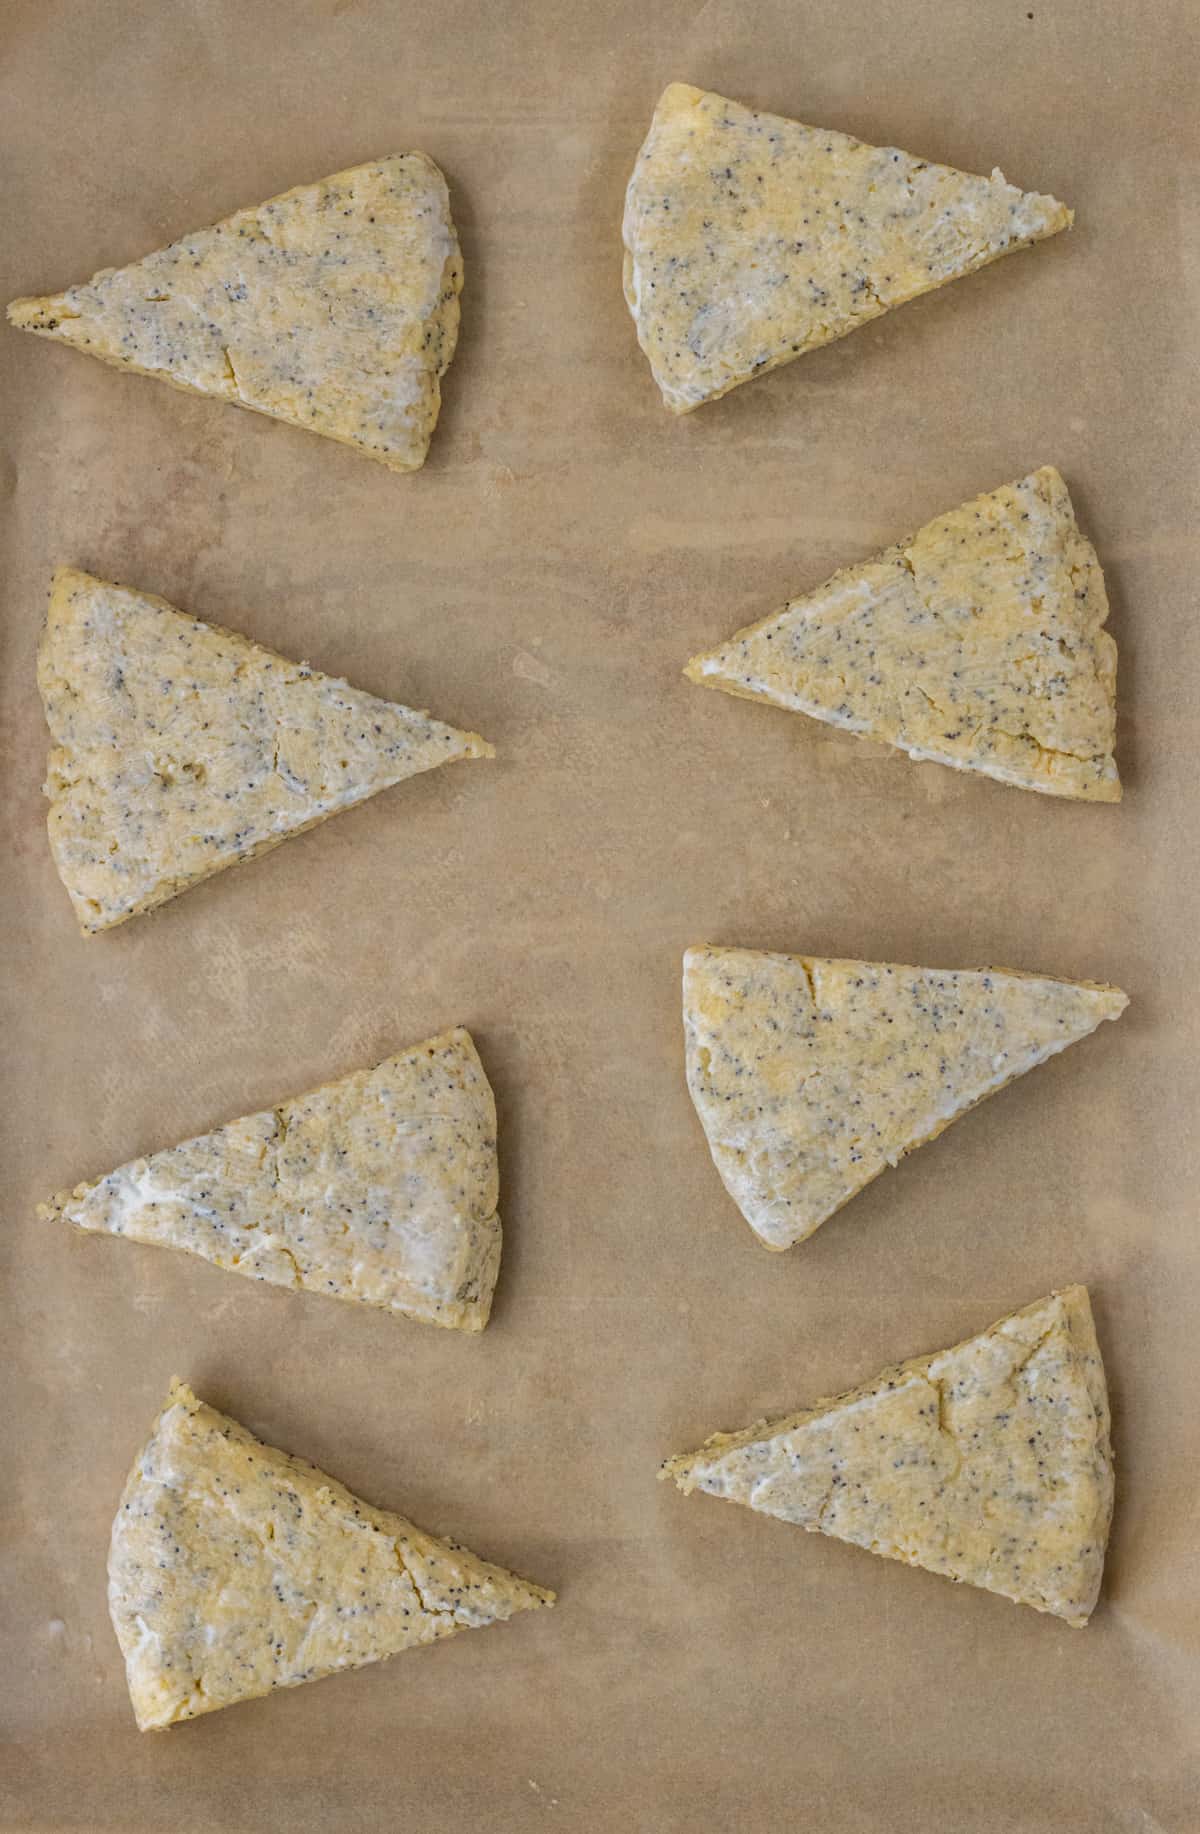 Unbaked lemon poppy seed scones on a parchment-lined baking sheet.